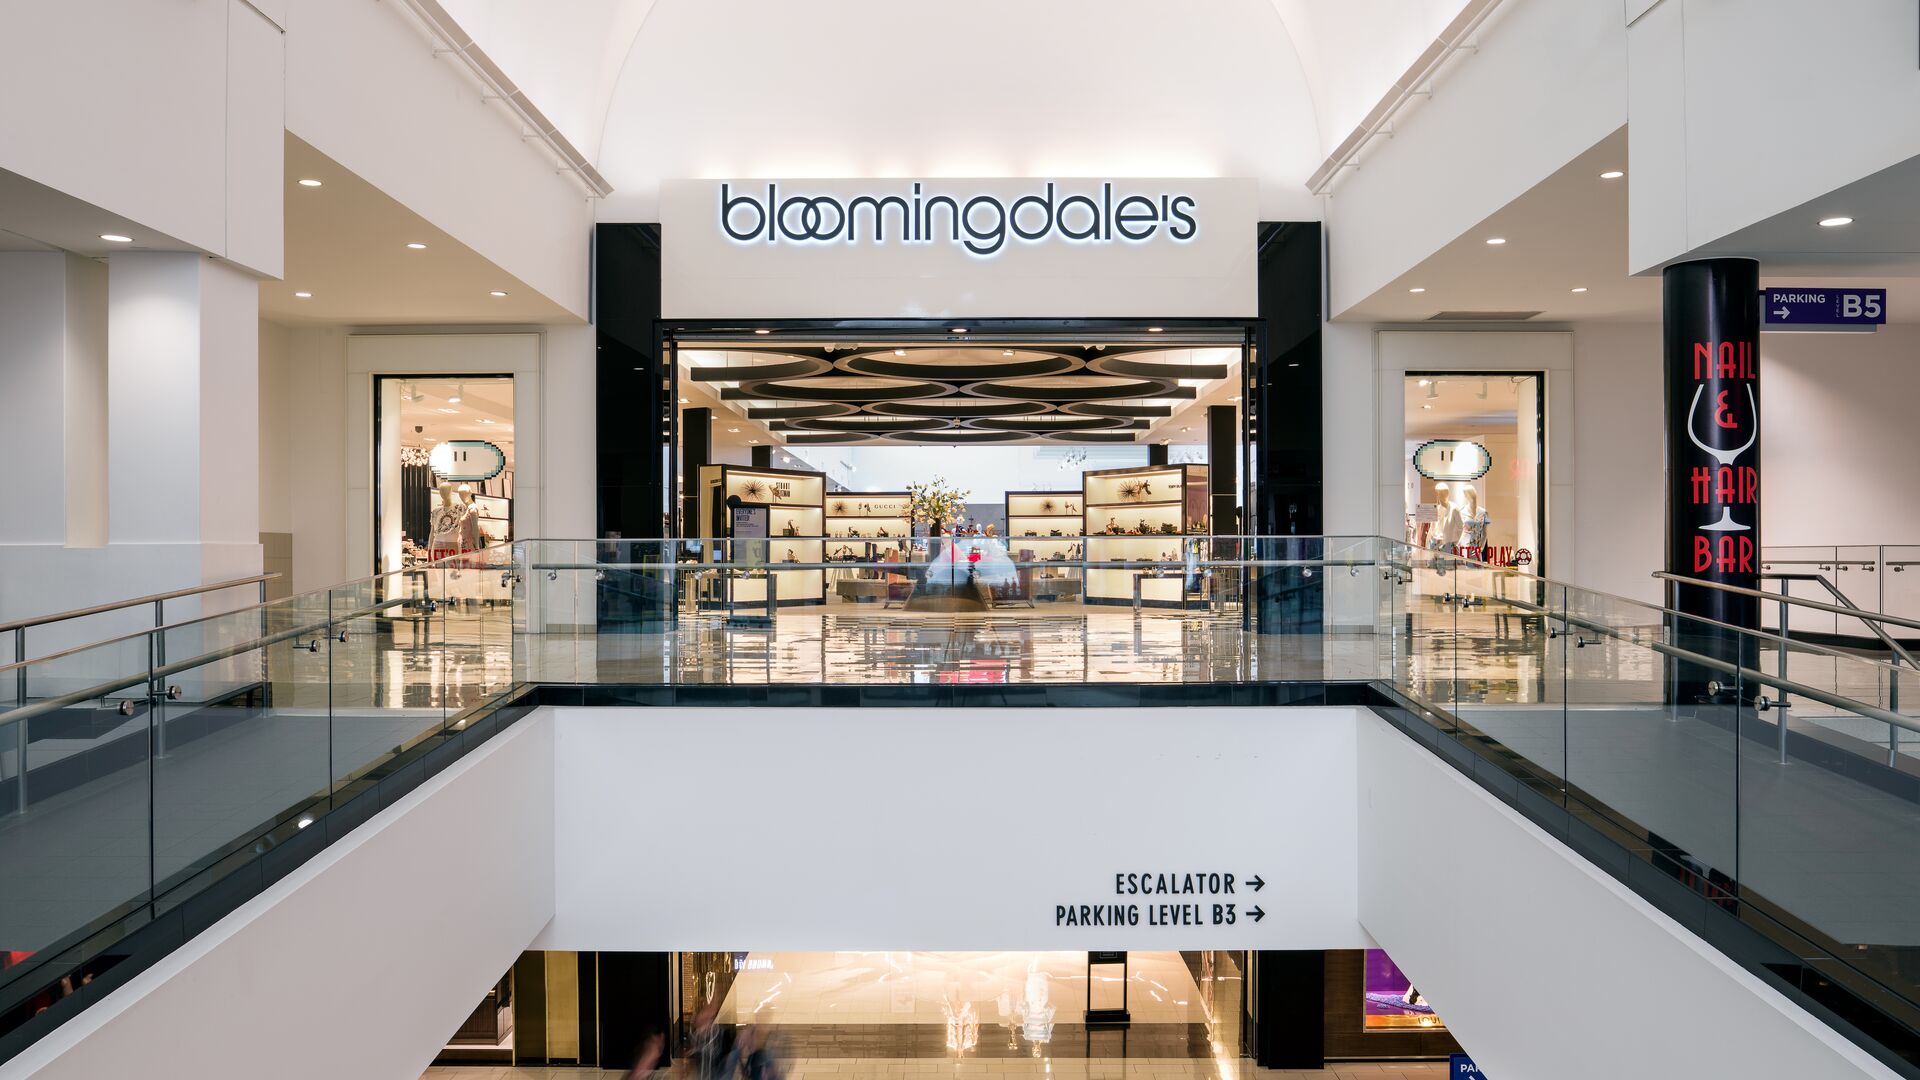 Entrance to Bloomingdales inside the mall.